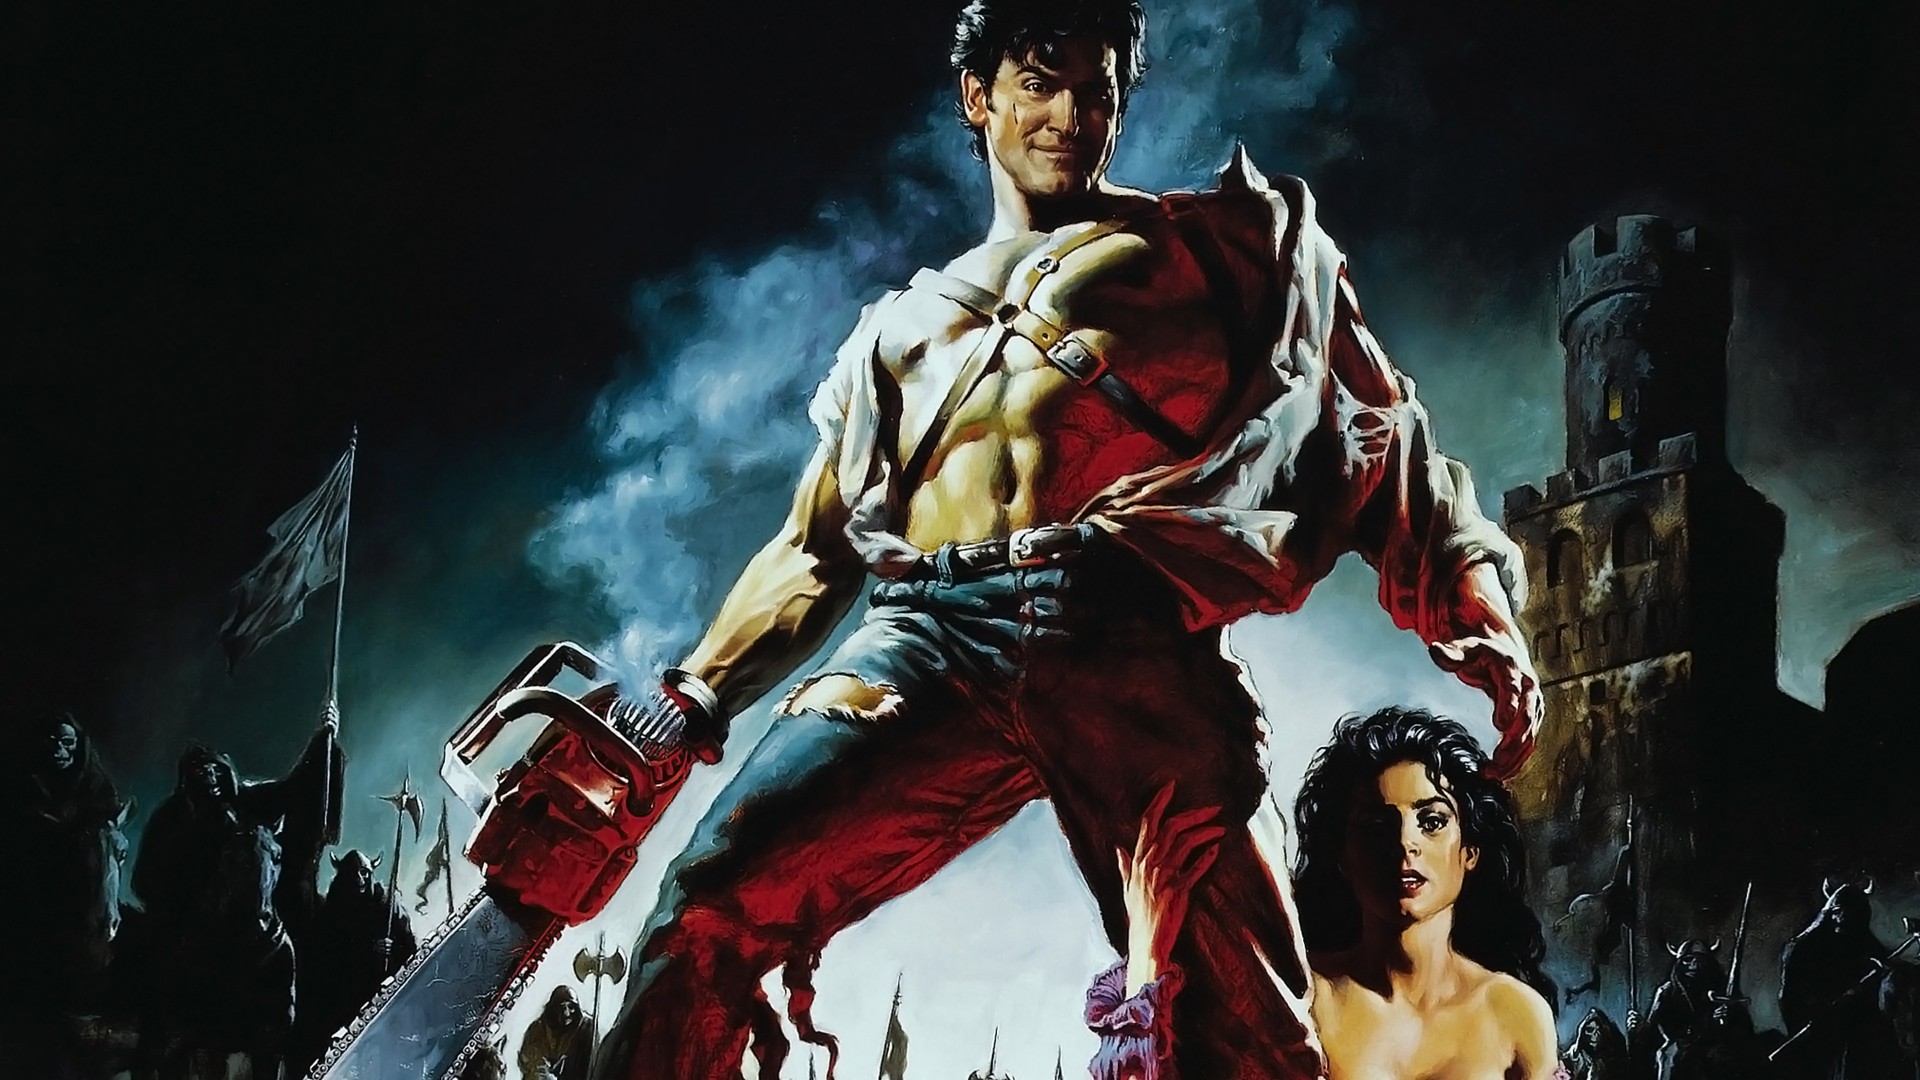 General 1920x1080 Evil Dead chainsaws Bruce Campbell Army of Darkness movies movie poster digital art